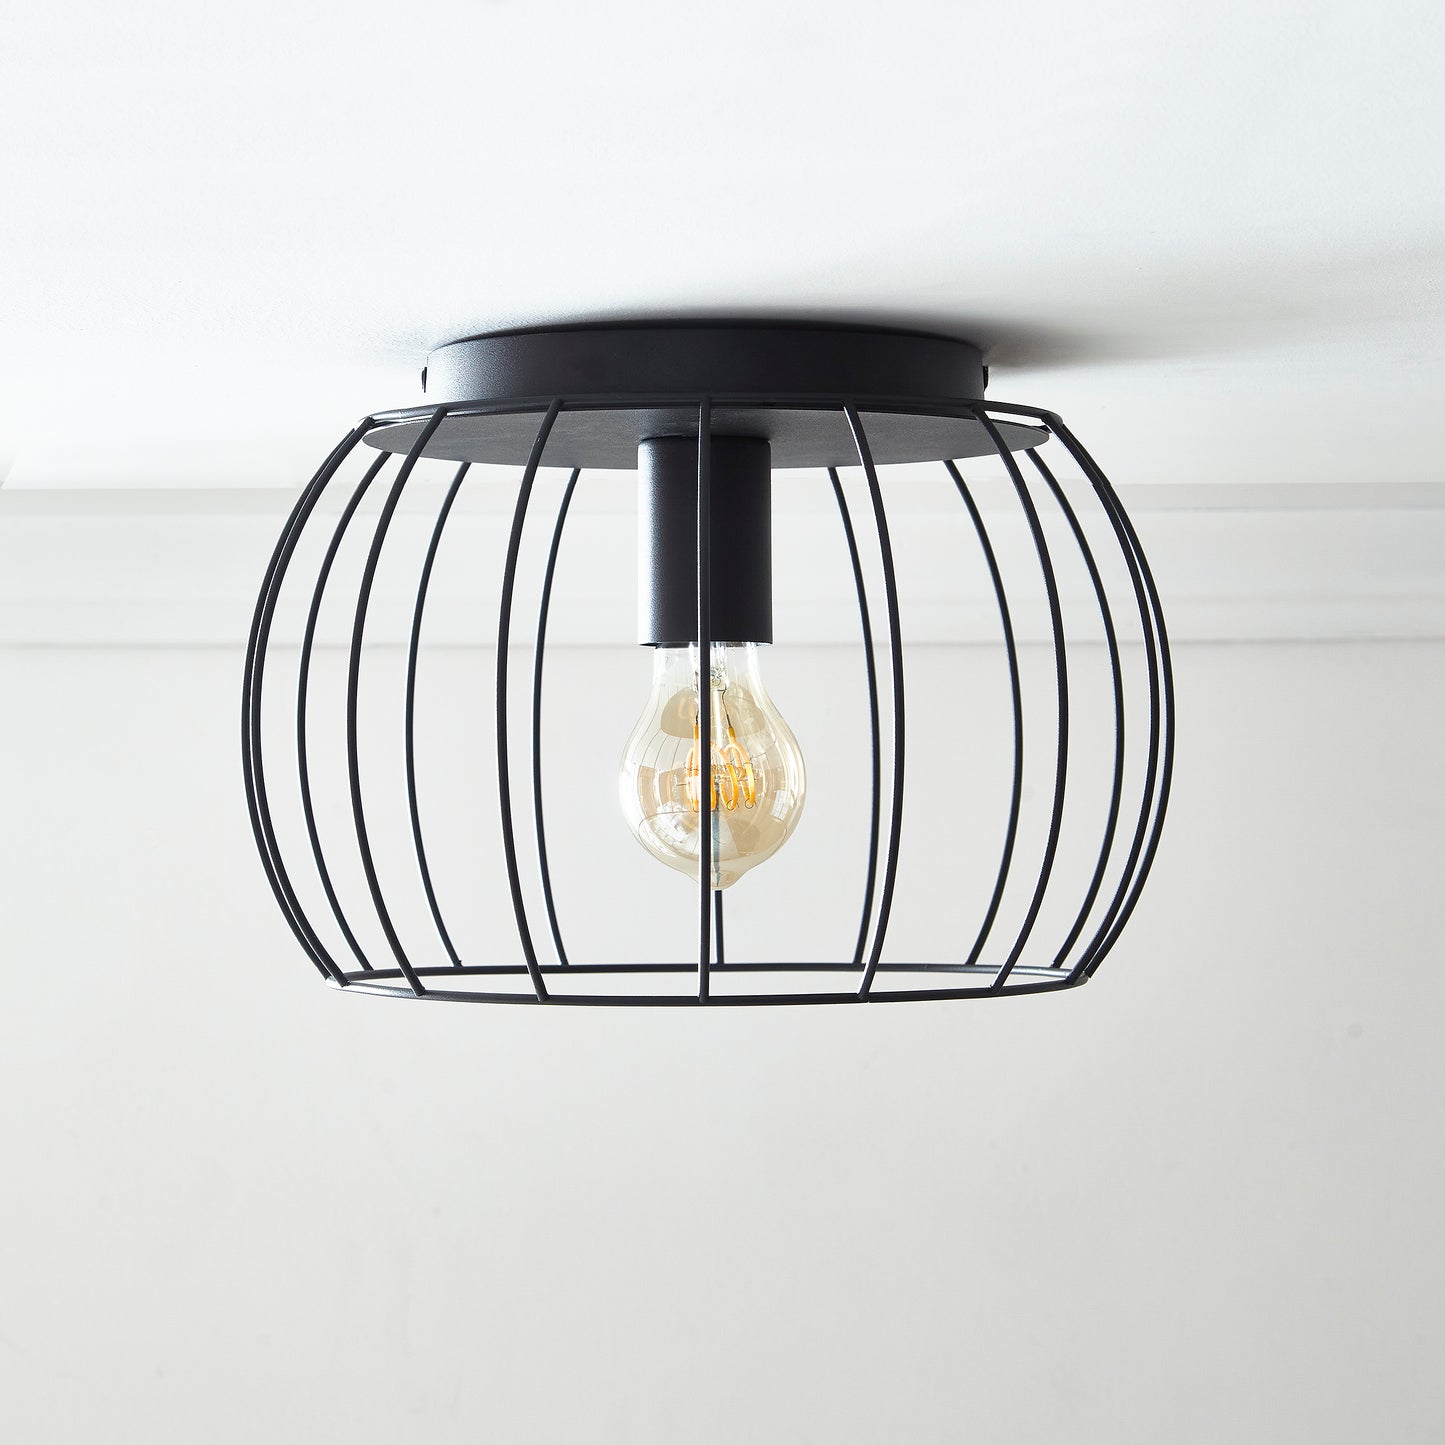 Black Ceiling Light Fitting in Cage Style Industrial Look